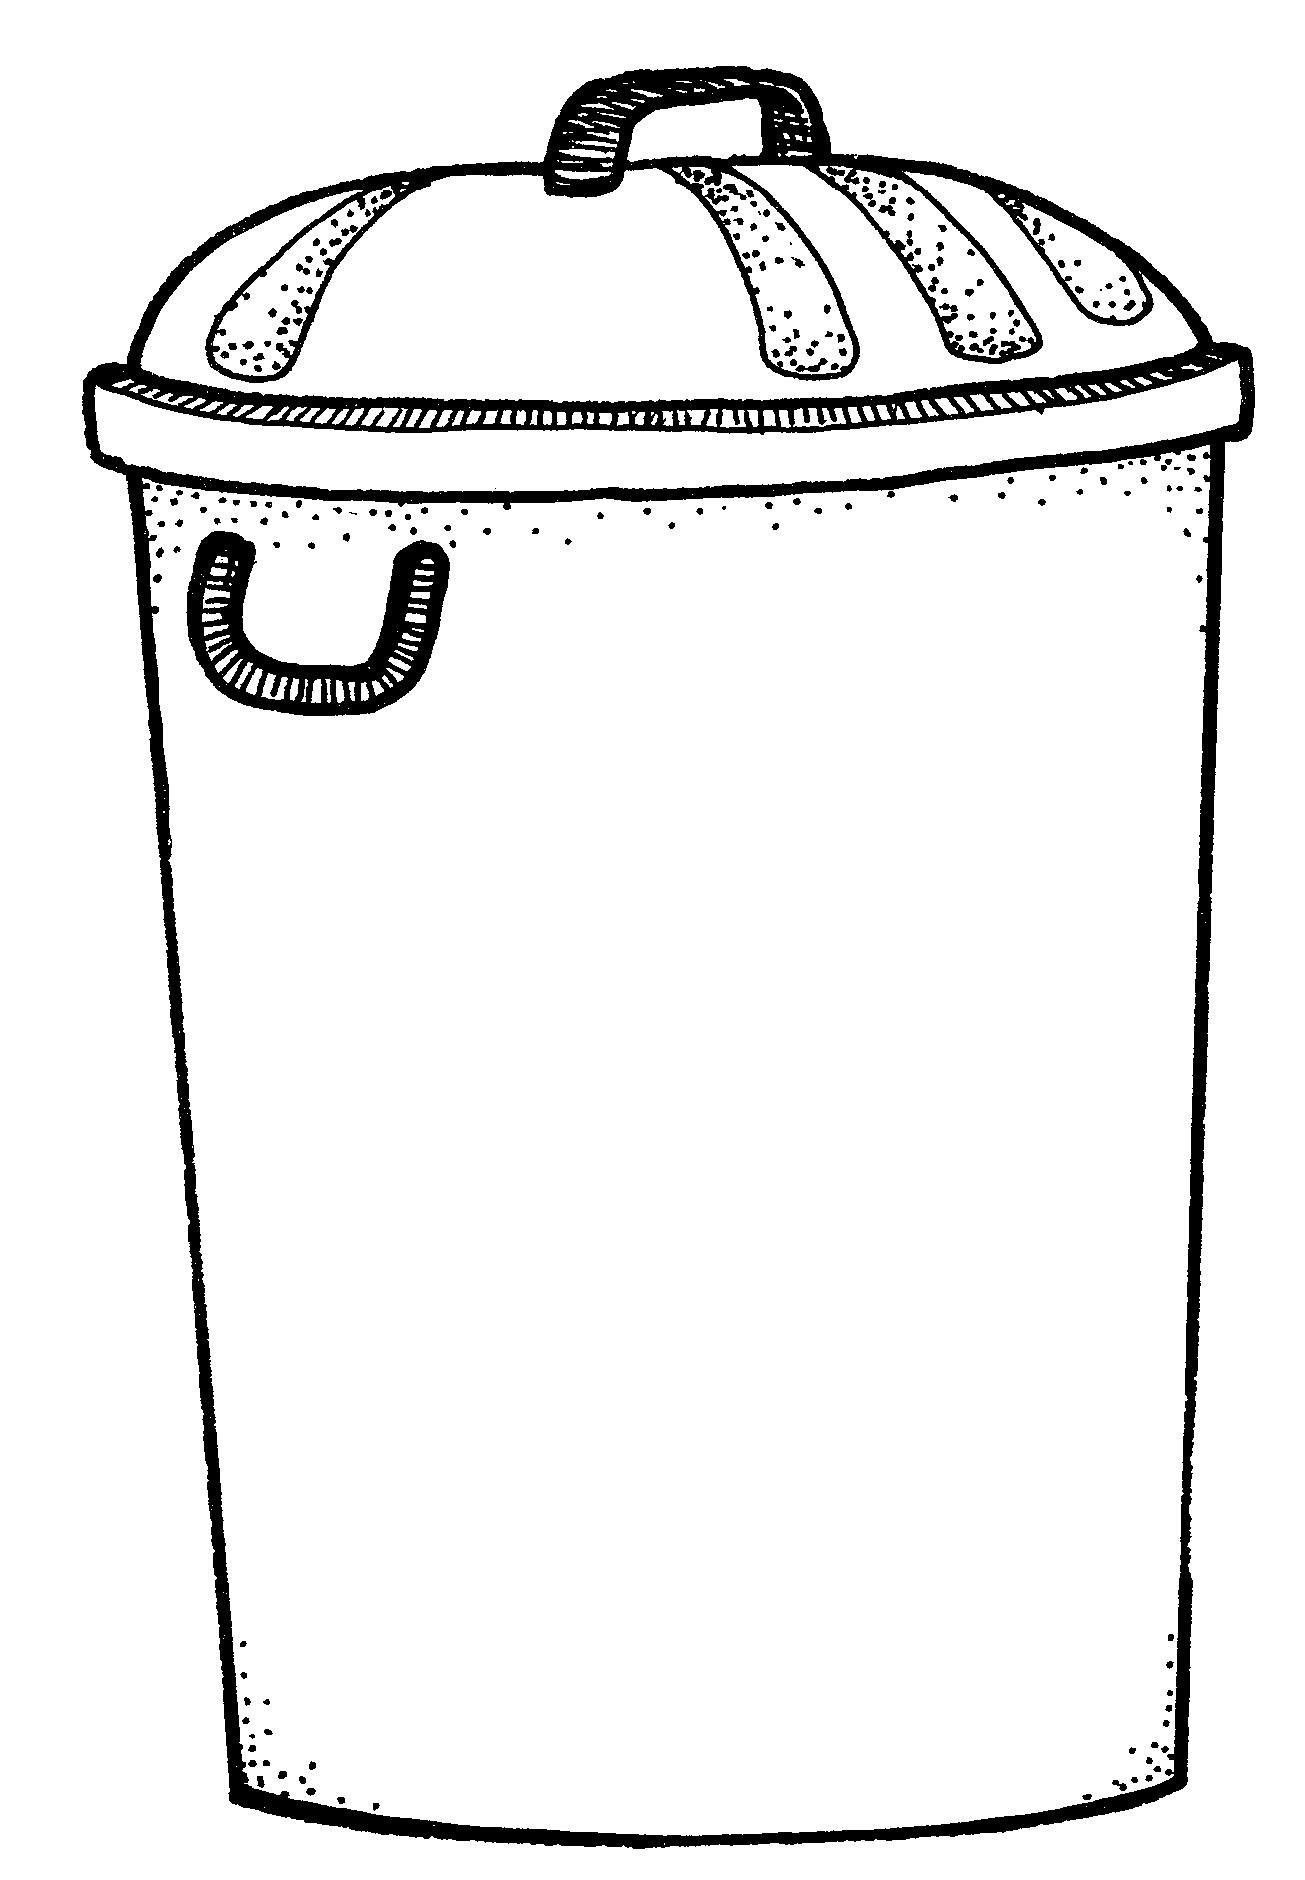 Clipart Of Trash Can - ClipArt Best